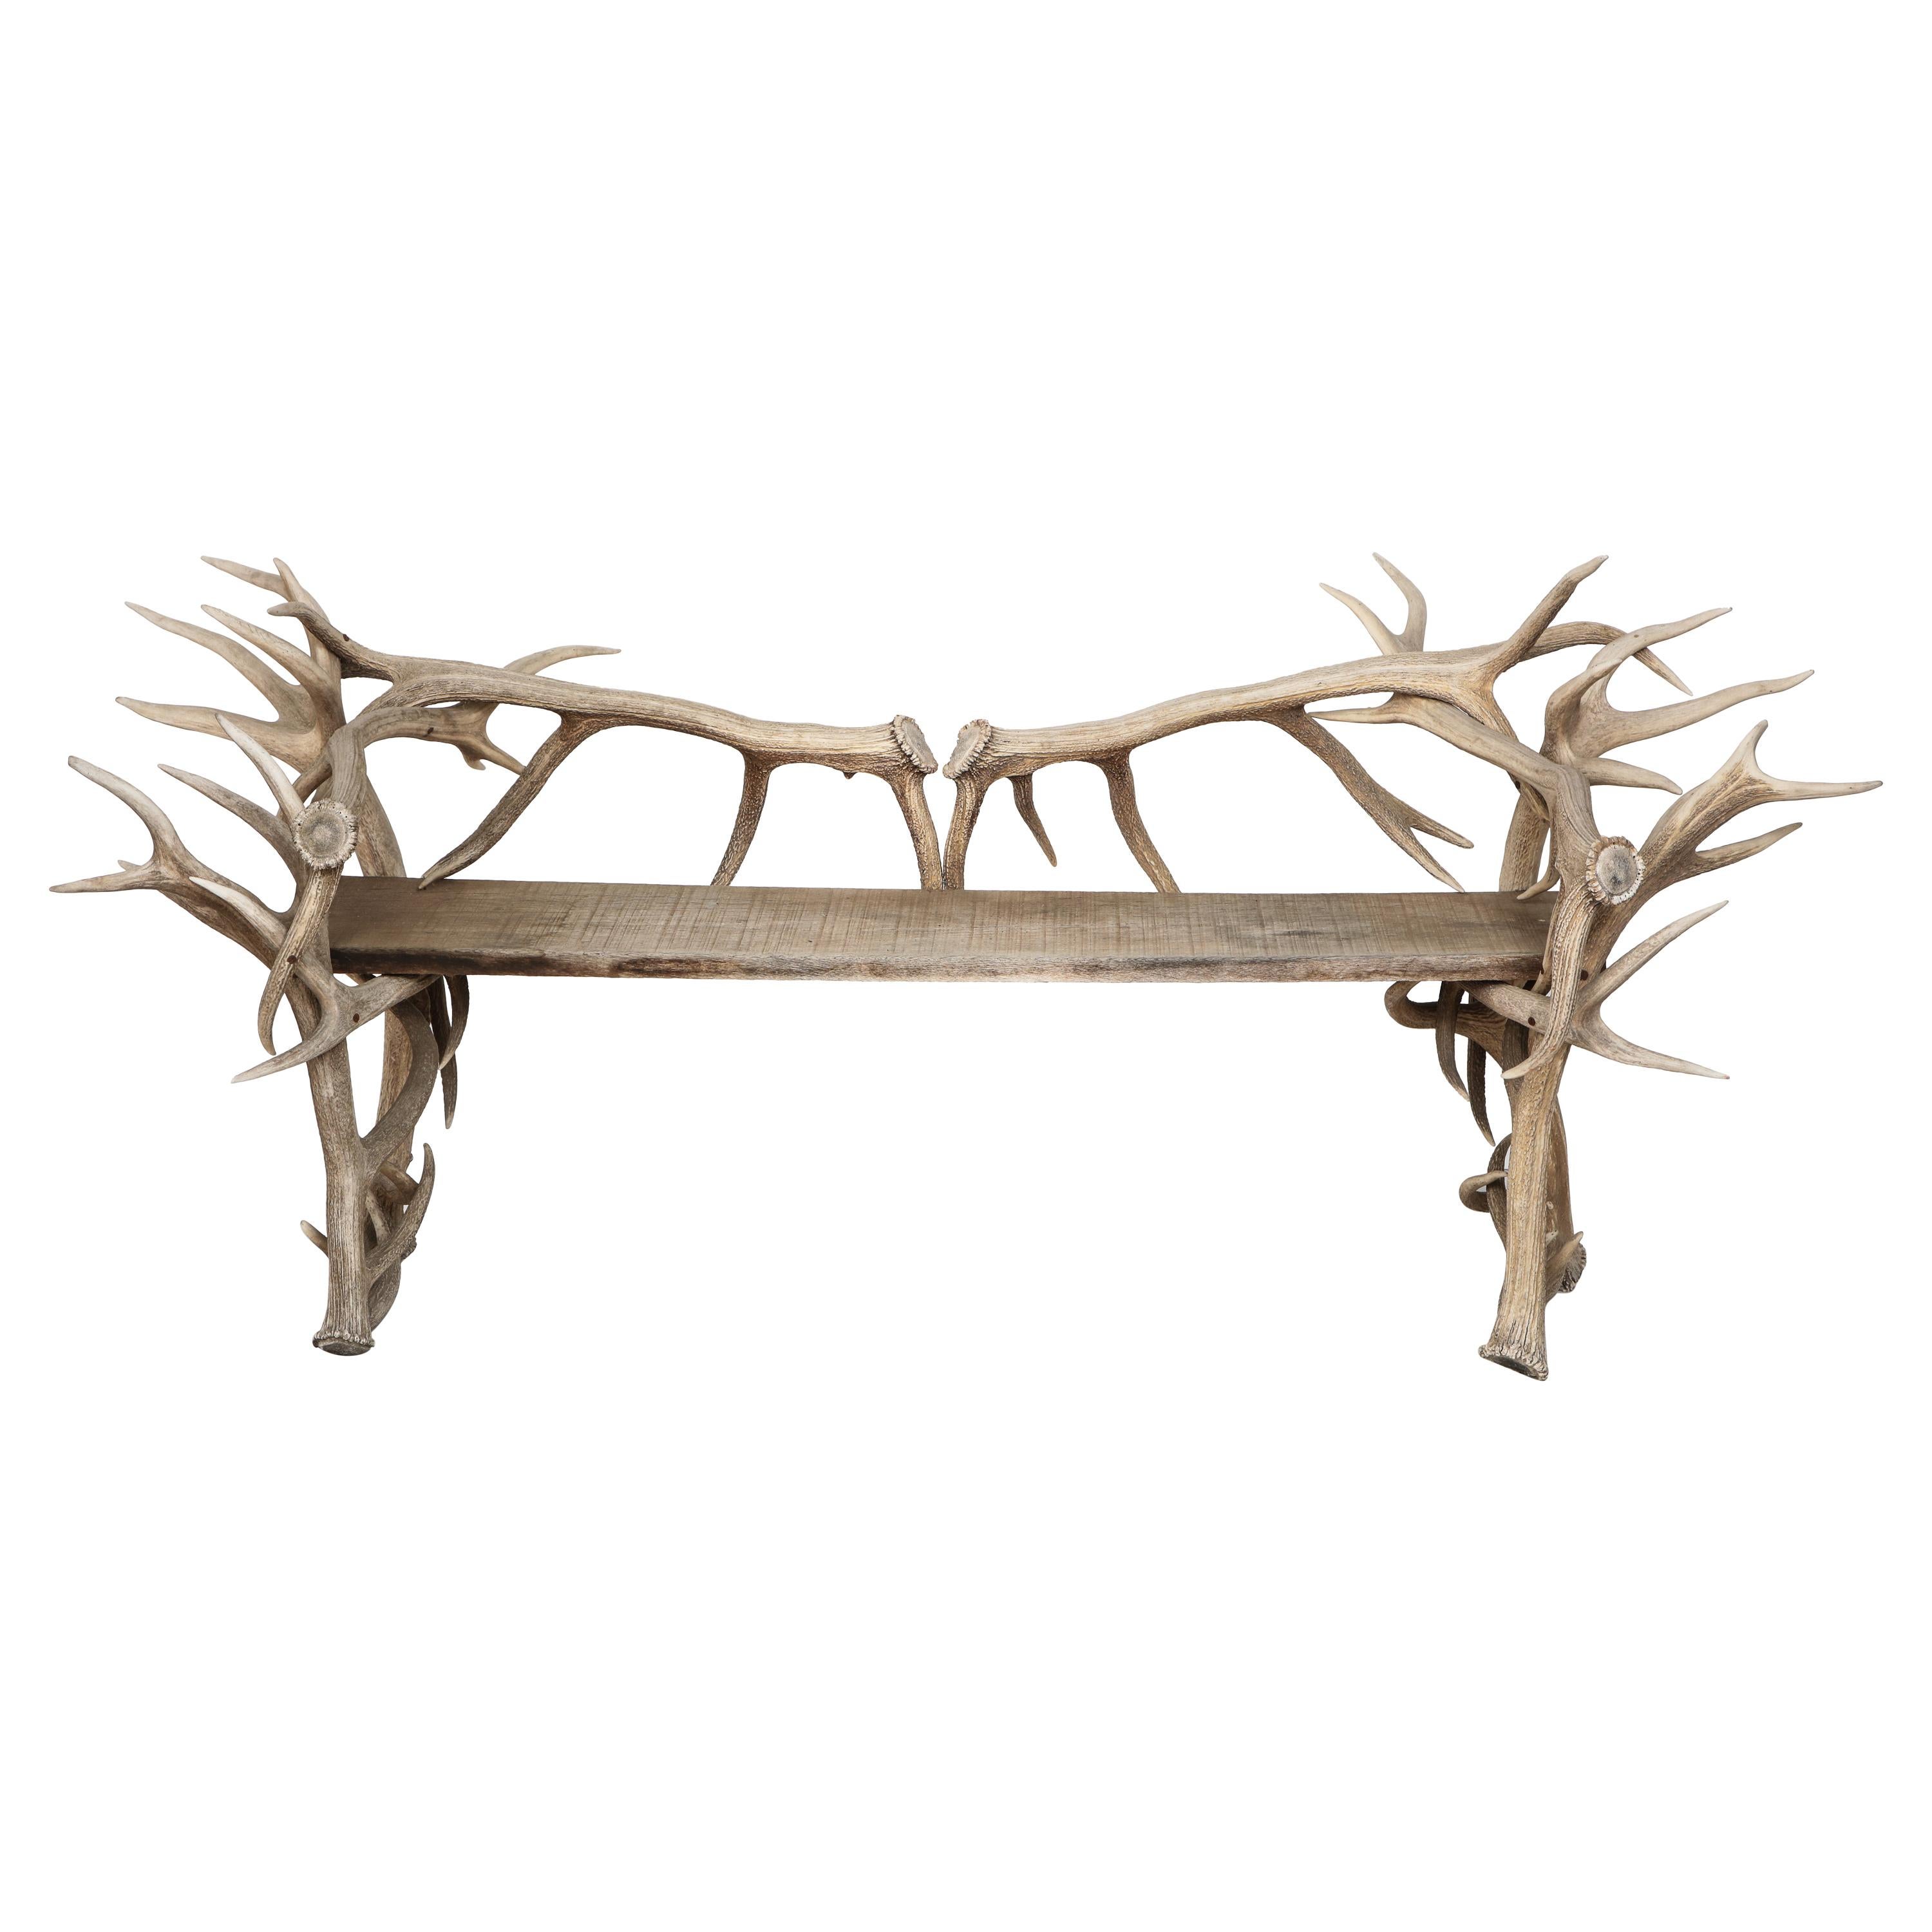 Spectacular Antler Chair or Bench